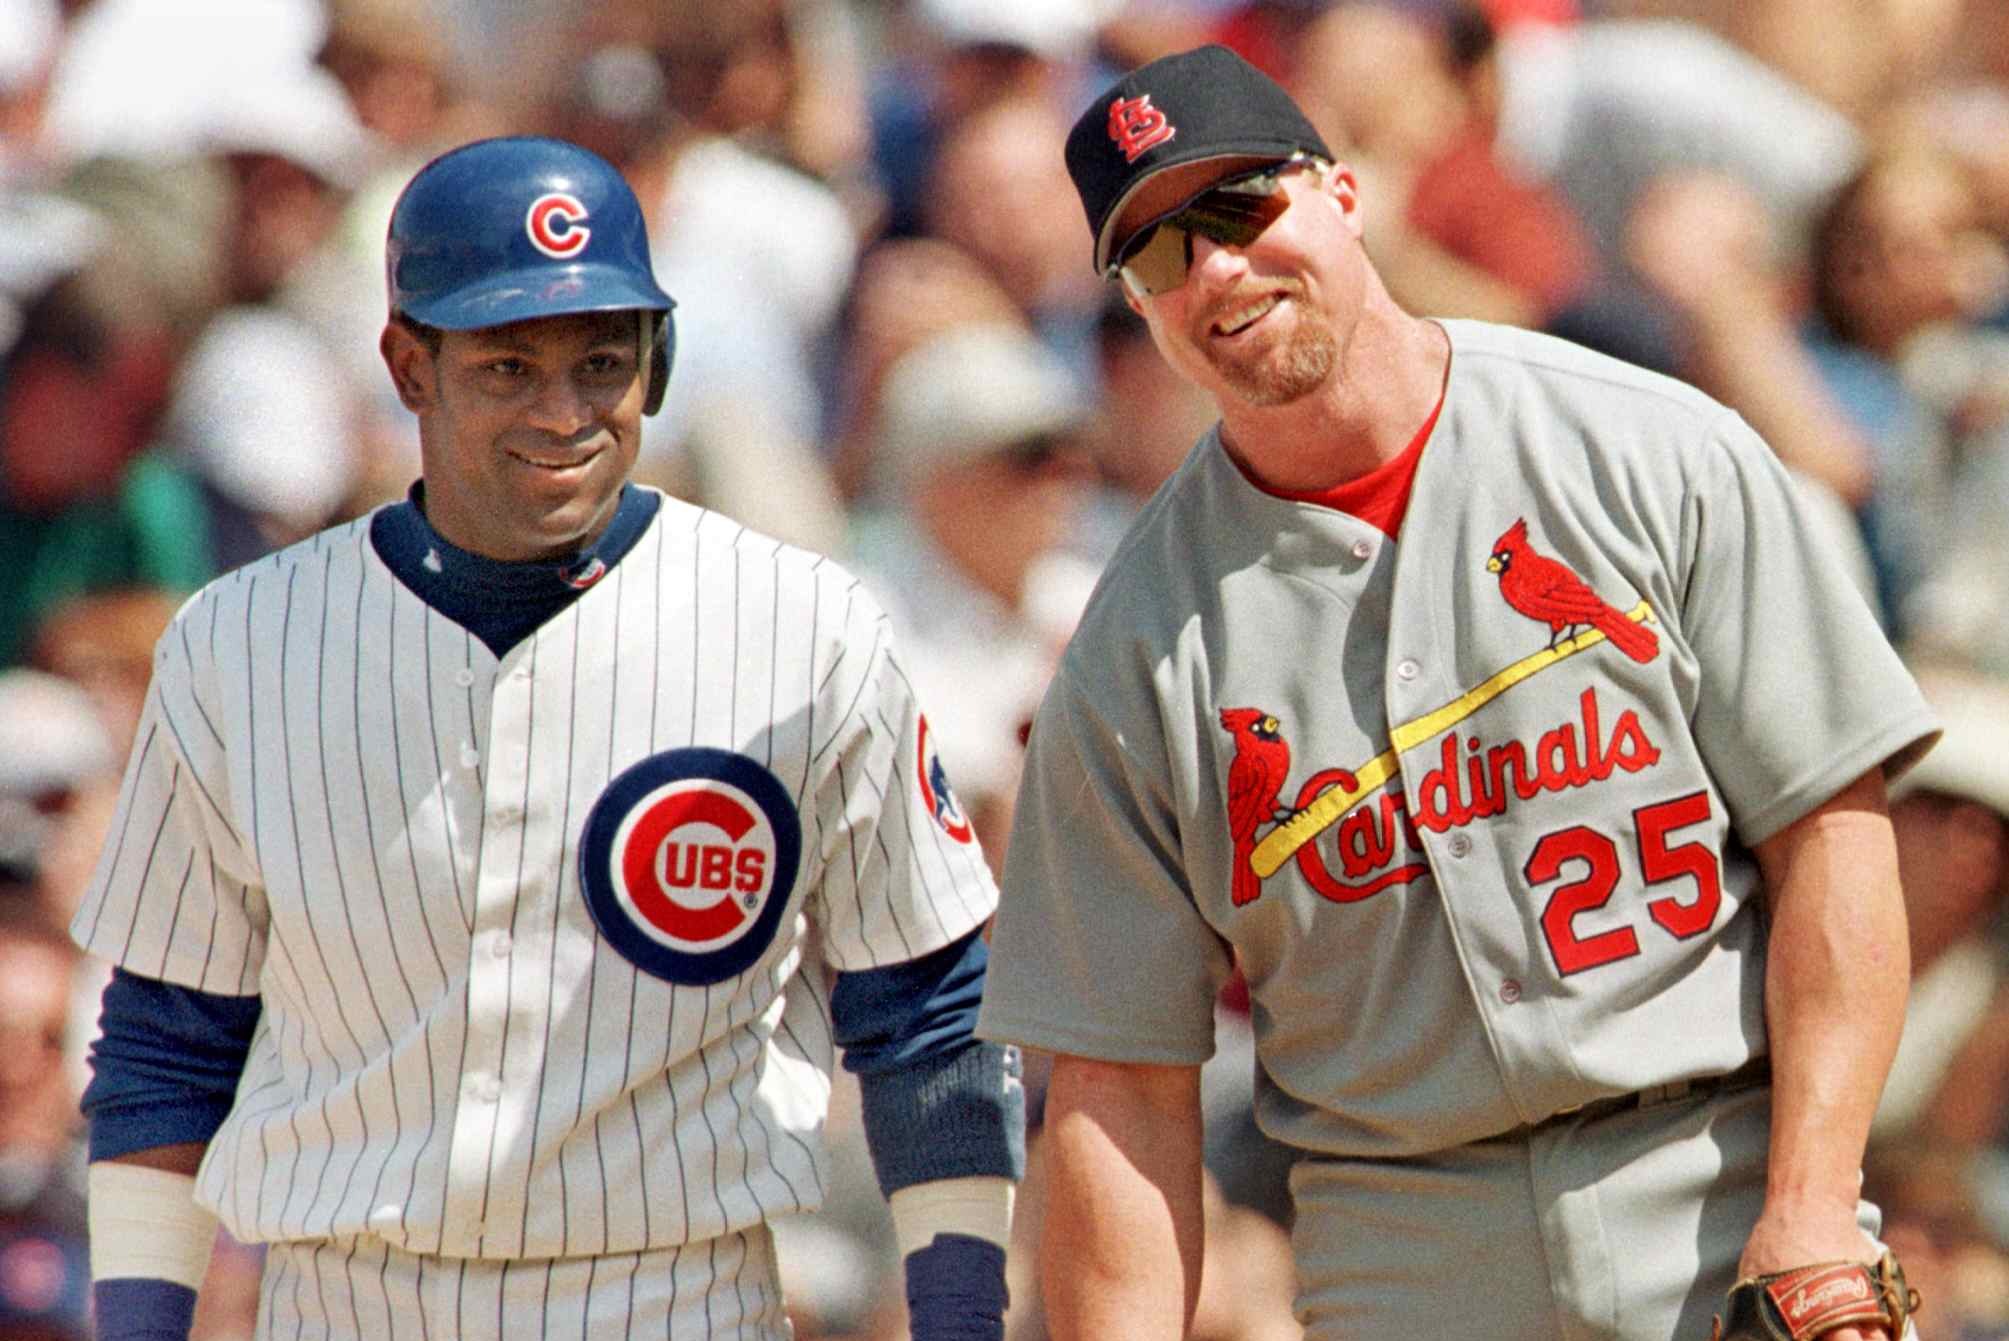 The trailer for Mark McGwire and Sammy Sosa's new 30 For 30 is